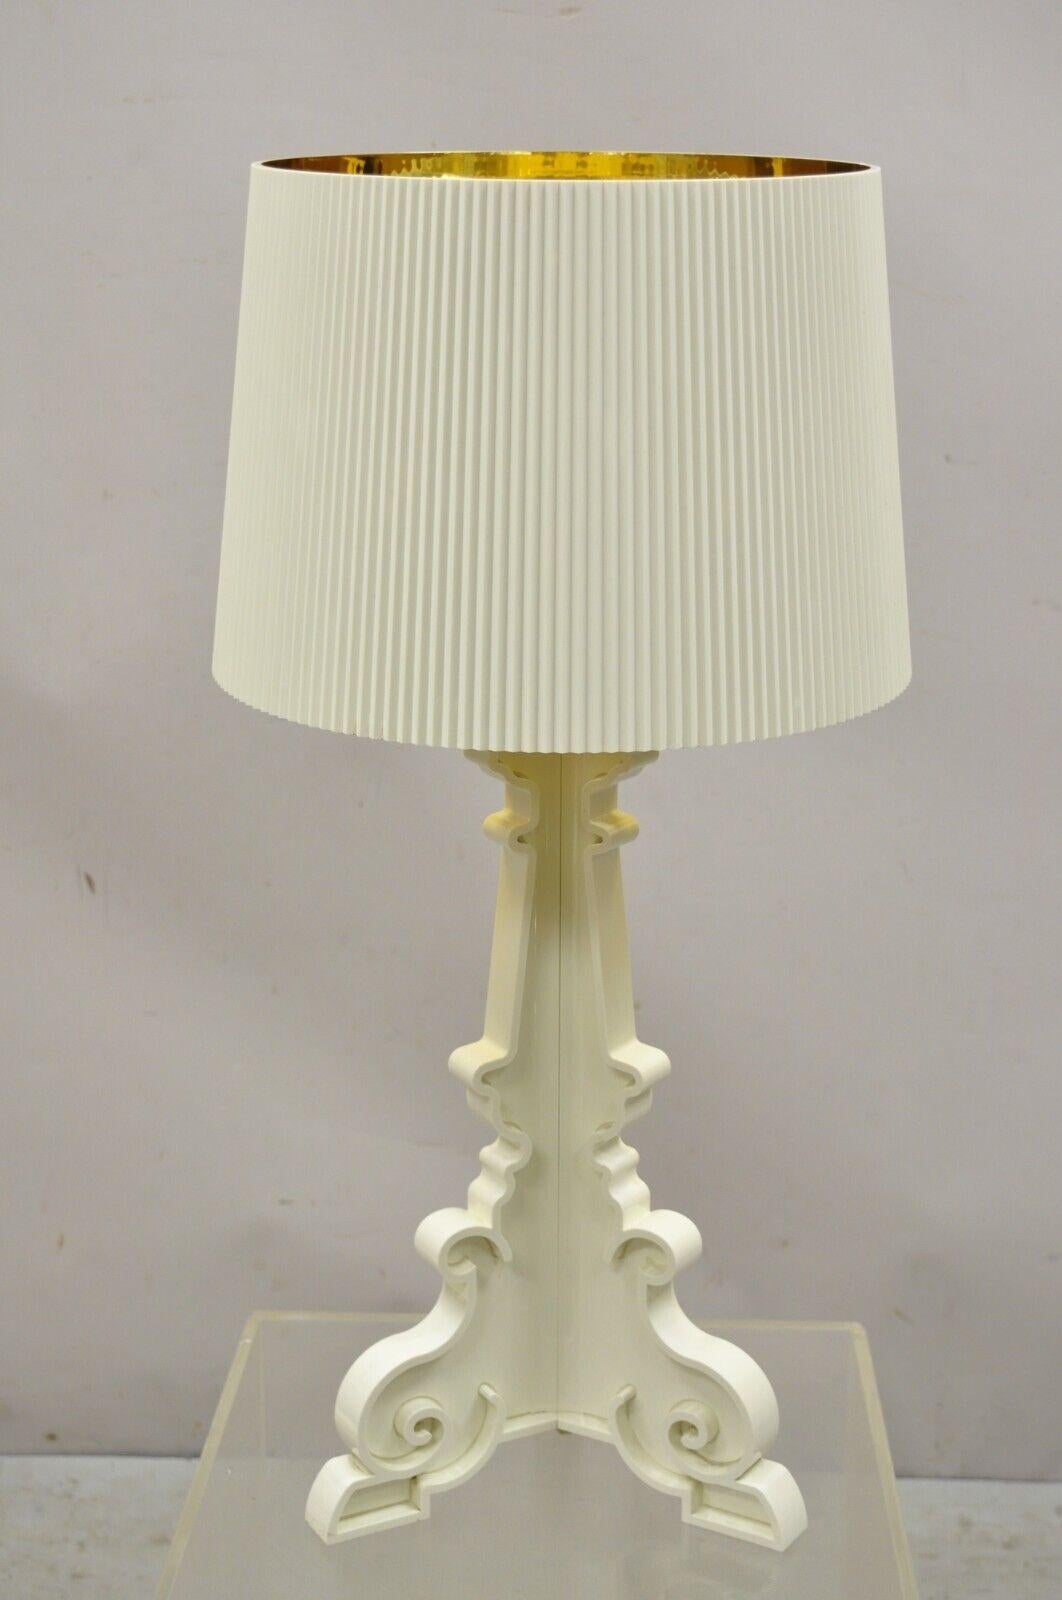 Kartell Ferruccio Laviani Bourgie White Baroque Table Lamp with Shade. Item features the original shade with gold interior. Off white colored lamp, original label, clean modernist lines, great style and form, original retail price $730. Circa Early